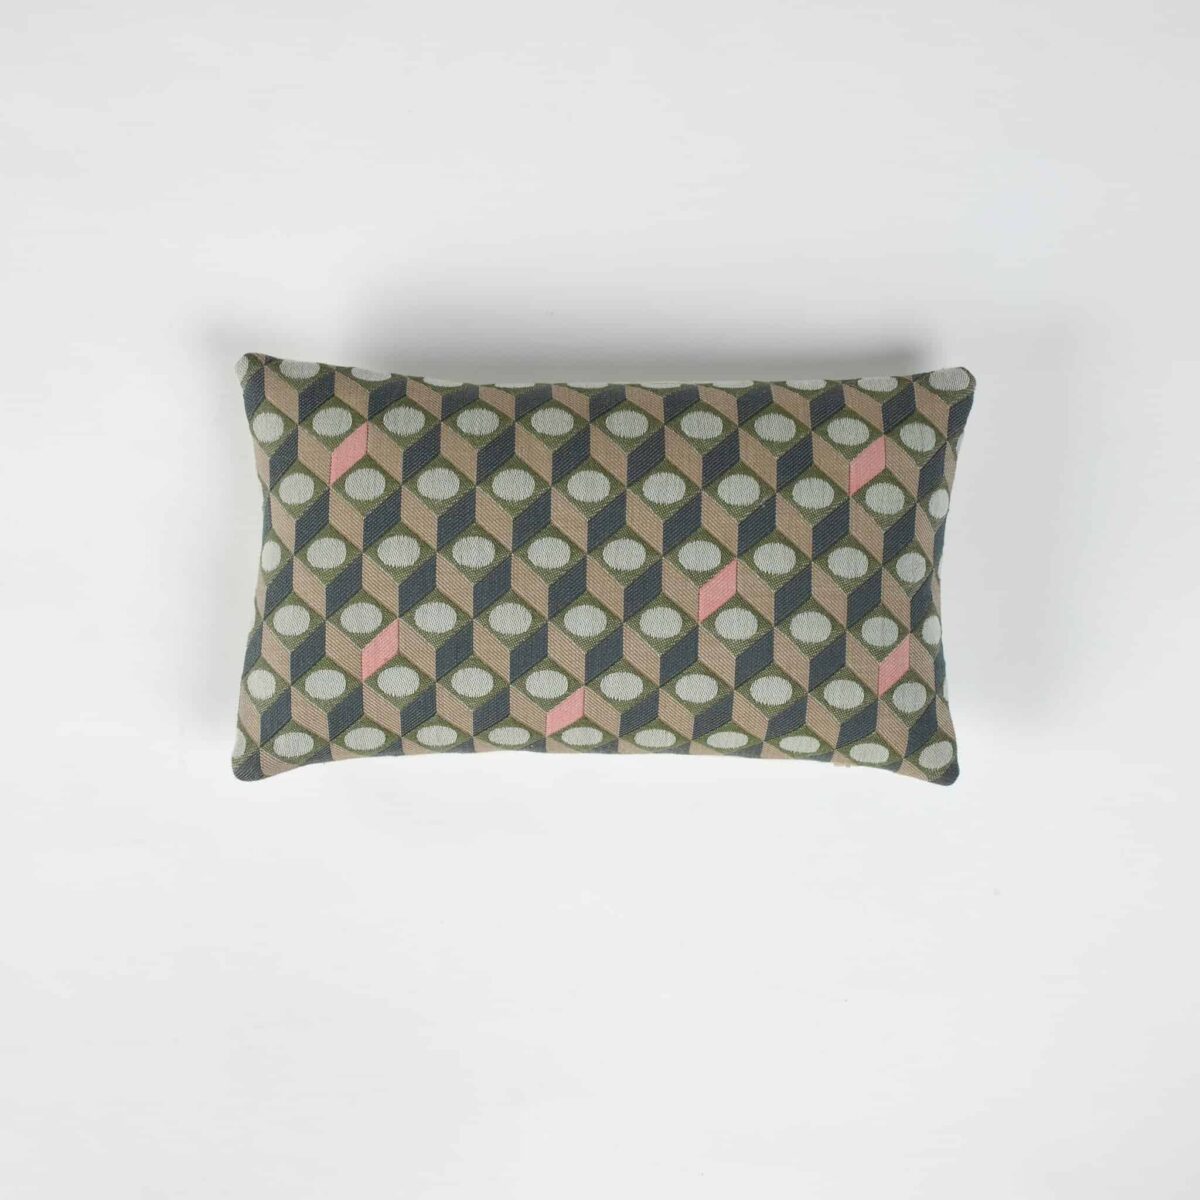 soft-series-rectangular-cushion-small-cubes-green-another-country-001